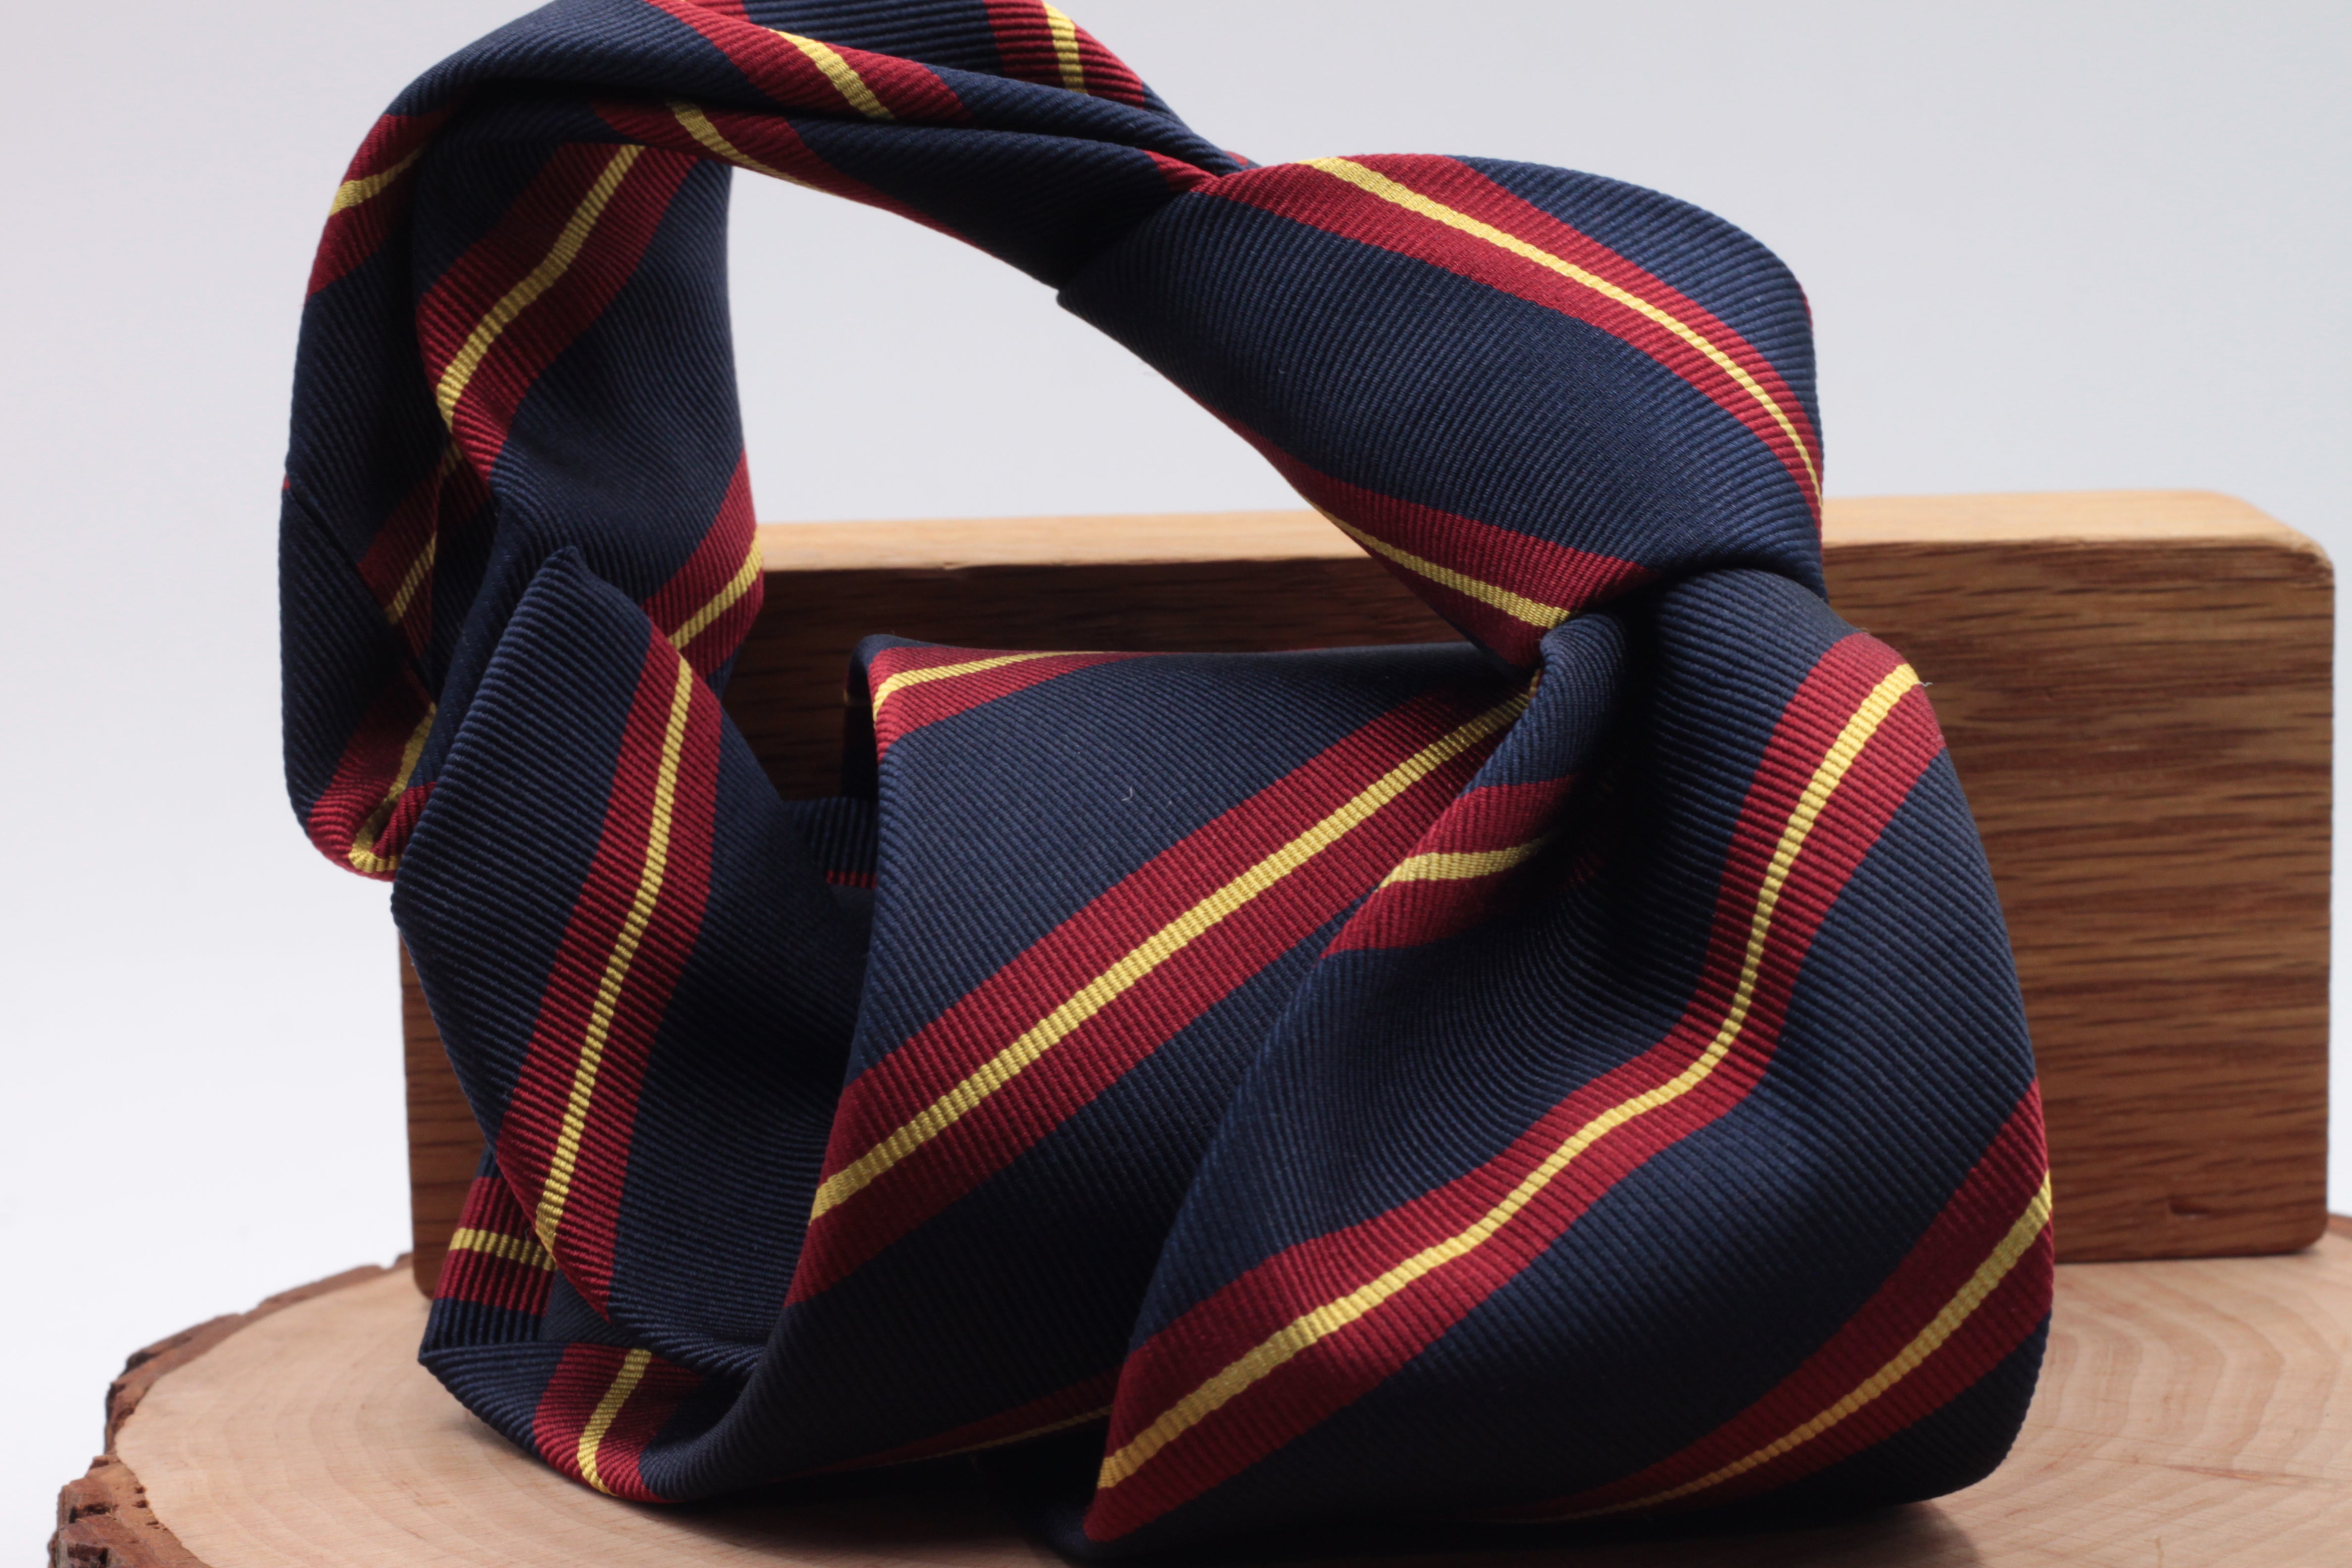 Holliday & Brown for Cruciani & Bella 100% Silk Jacquard  Regimental "Glasgow Yeomanry" Blue navy, red and Yellow stripe tie Handmade in Italy 8 cm x 150 cm